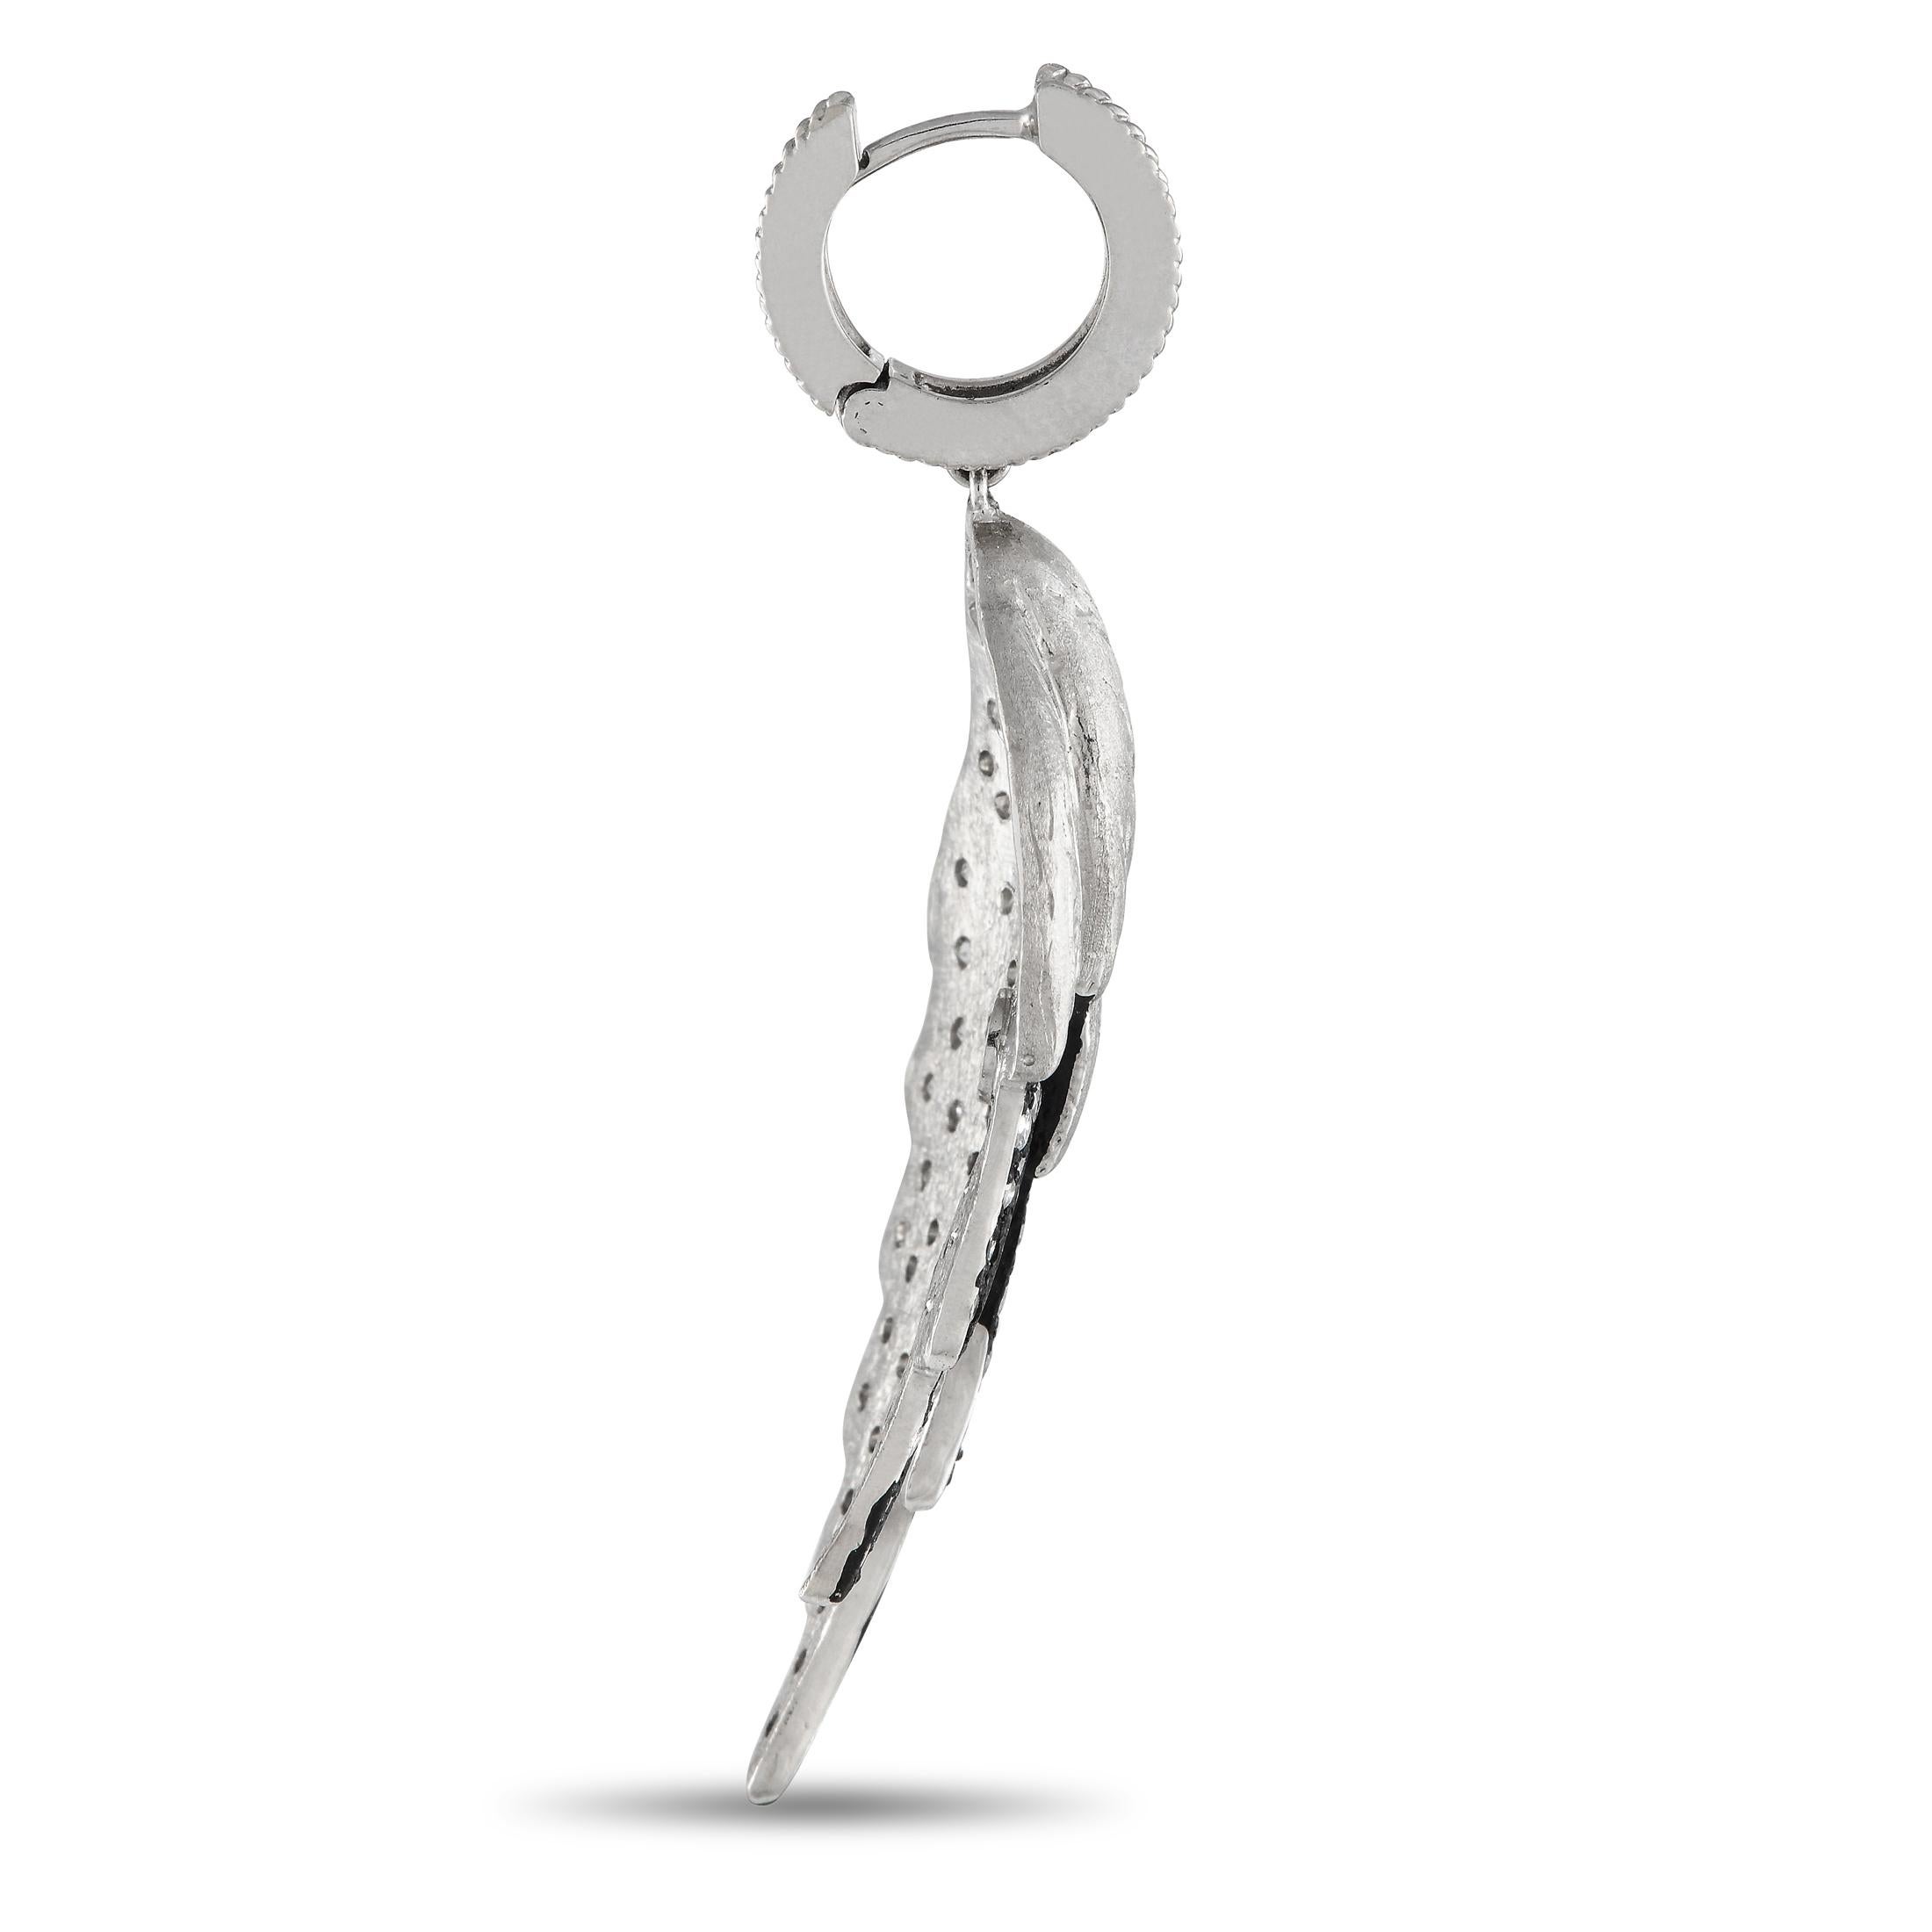 A delicate wing-shaped design makes these earrings simply unforgettable. Each one features a Silver setting that measures 2.0 long by 0.75 wide. Sparkling inset Diamonds with a total weight of 2.65 carats provide the perfect finishing touch.This